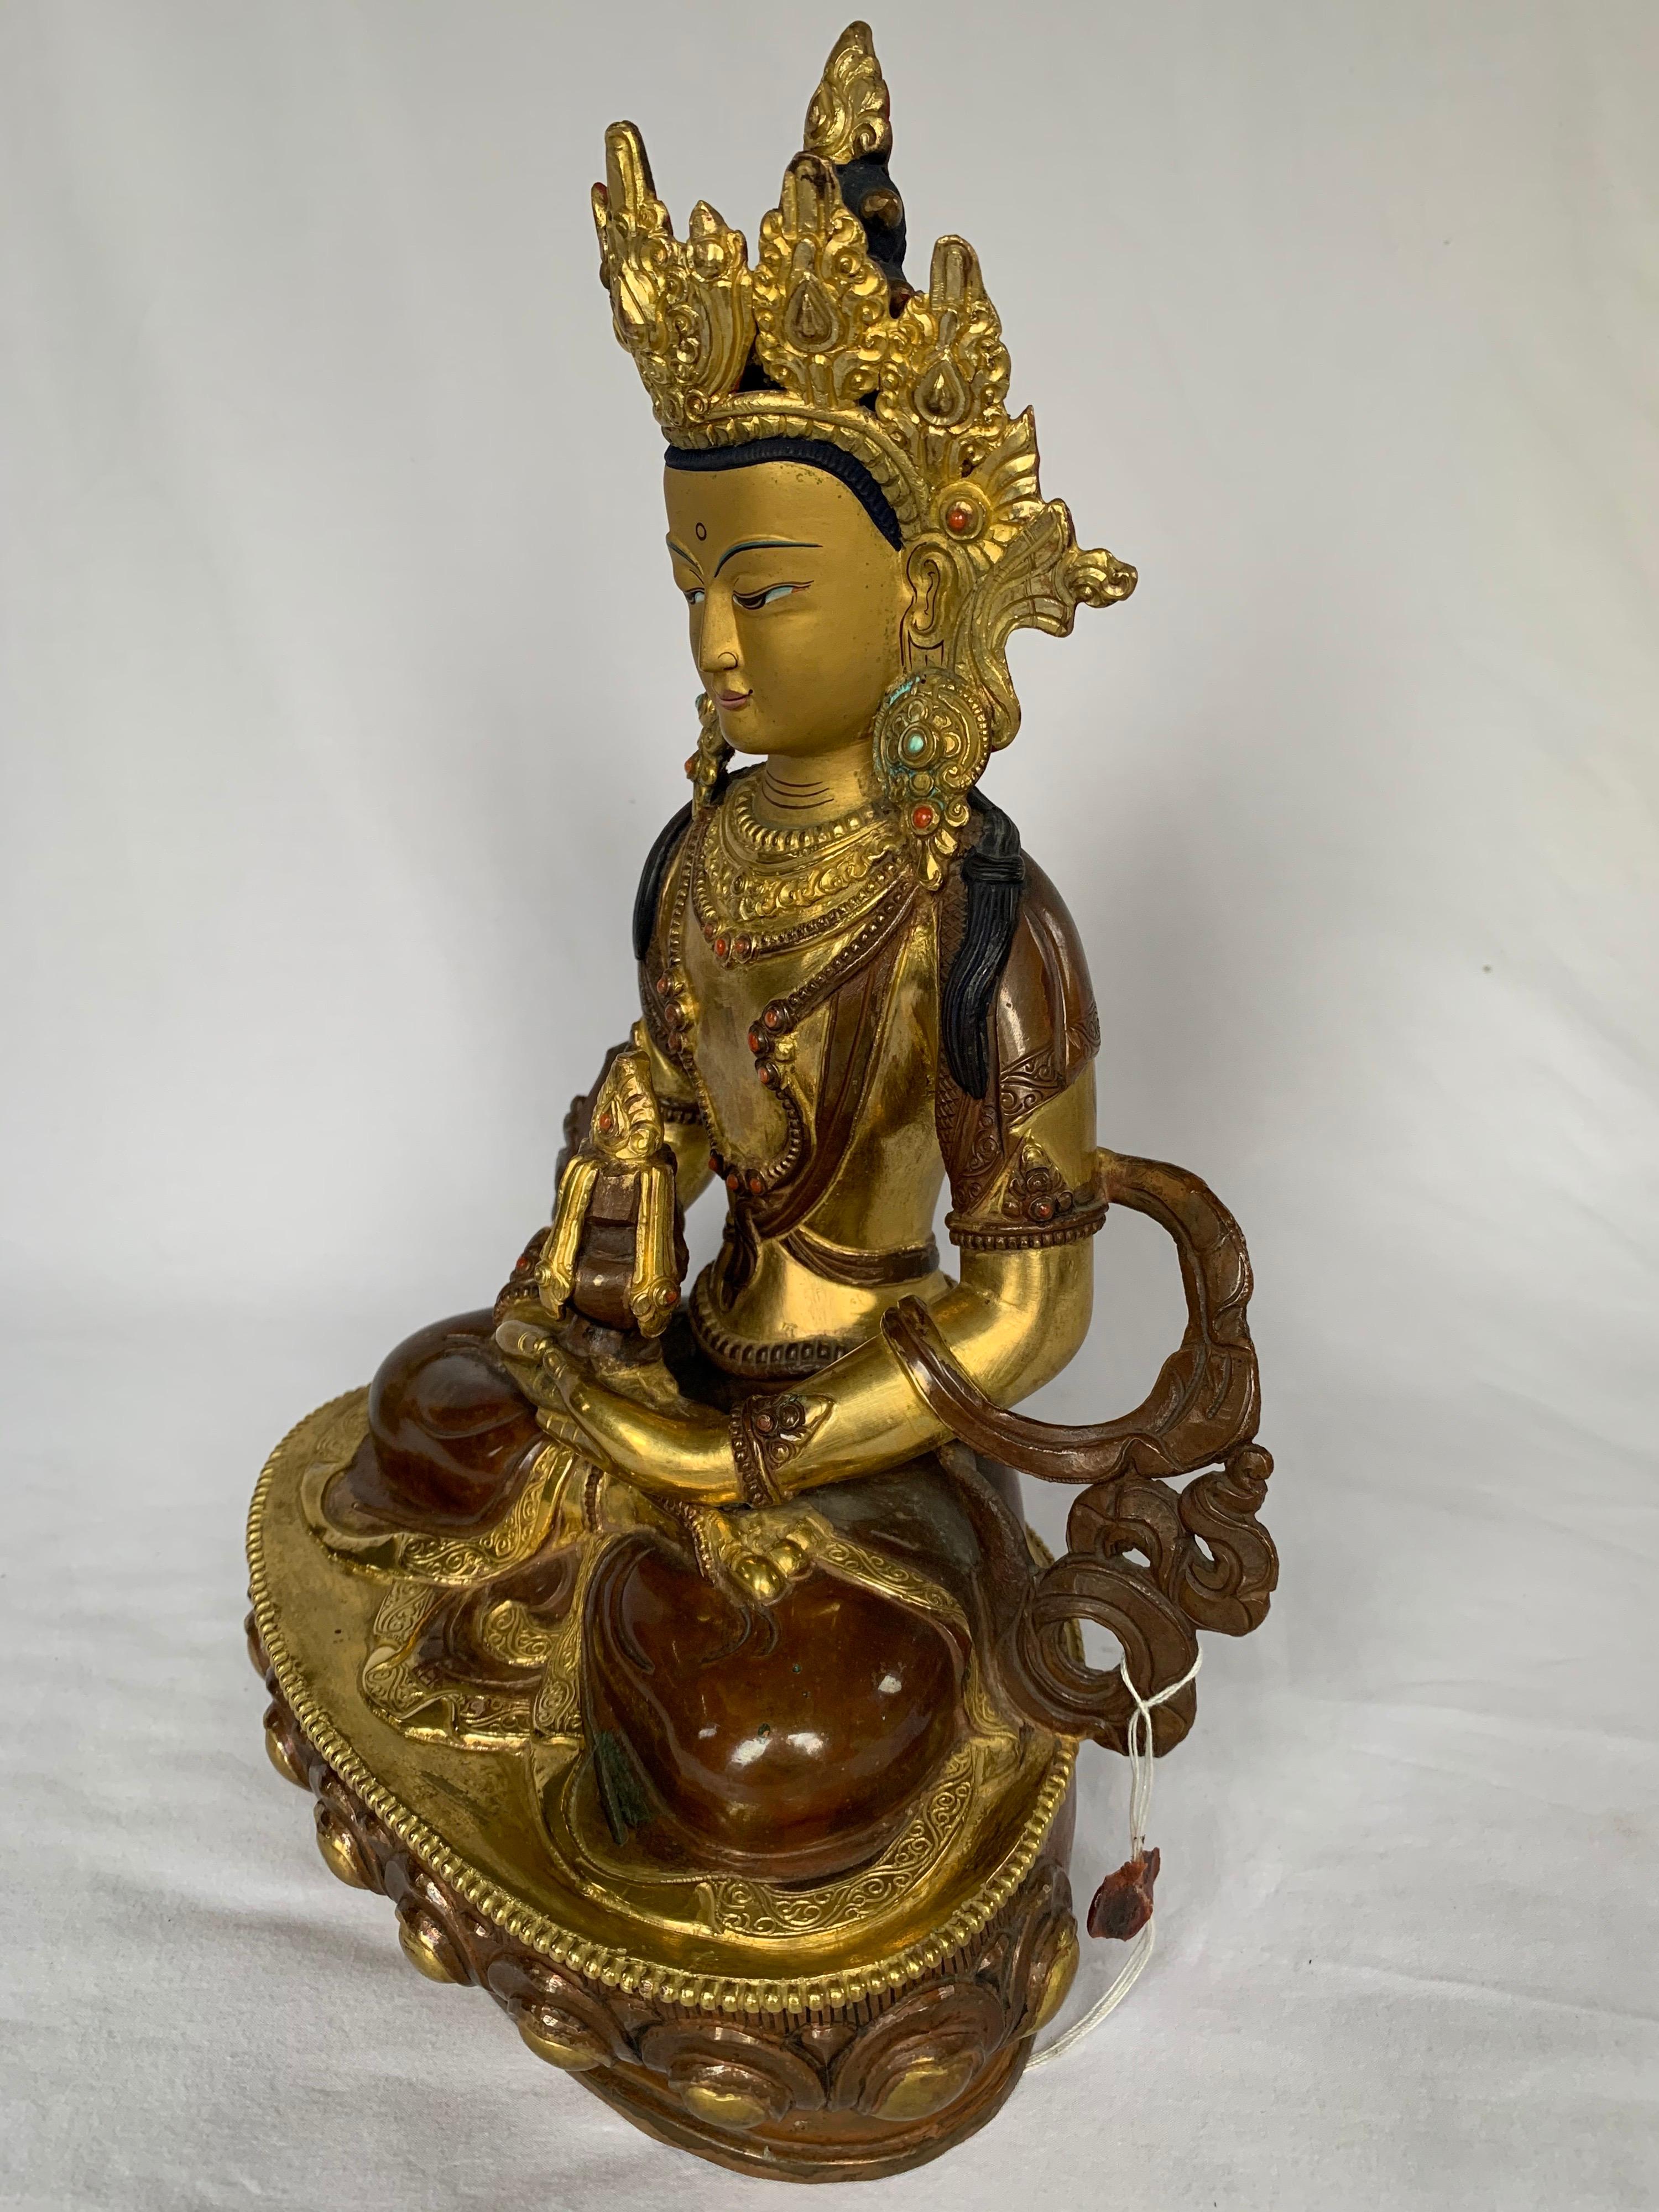 This statue is handcrafted by lost wax process which is one of the ancient process of metal craft. Aparmita is seated in 